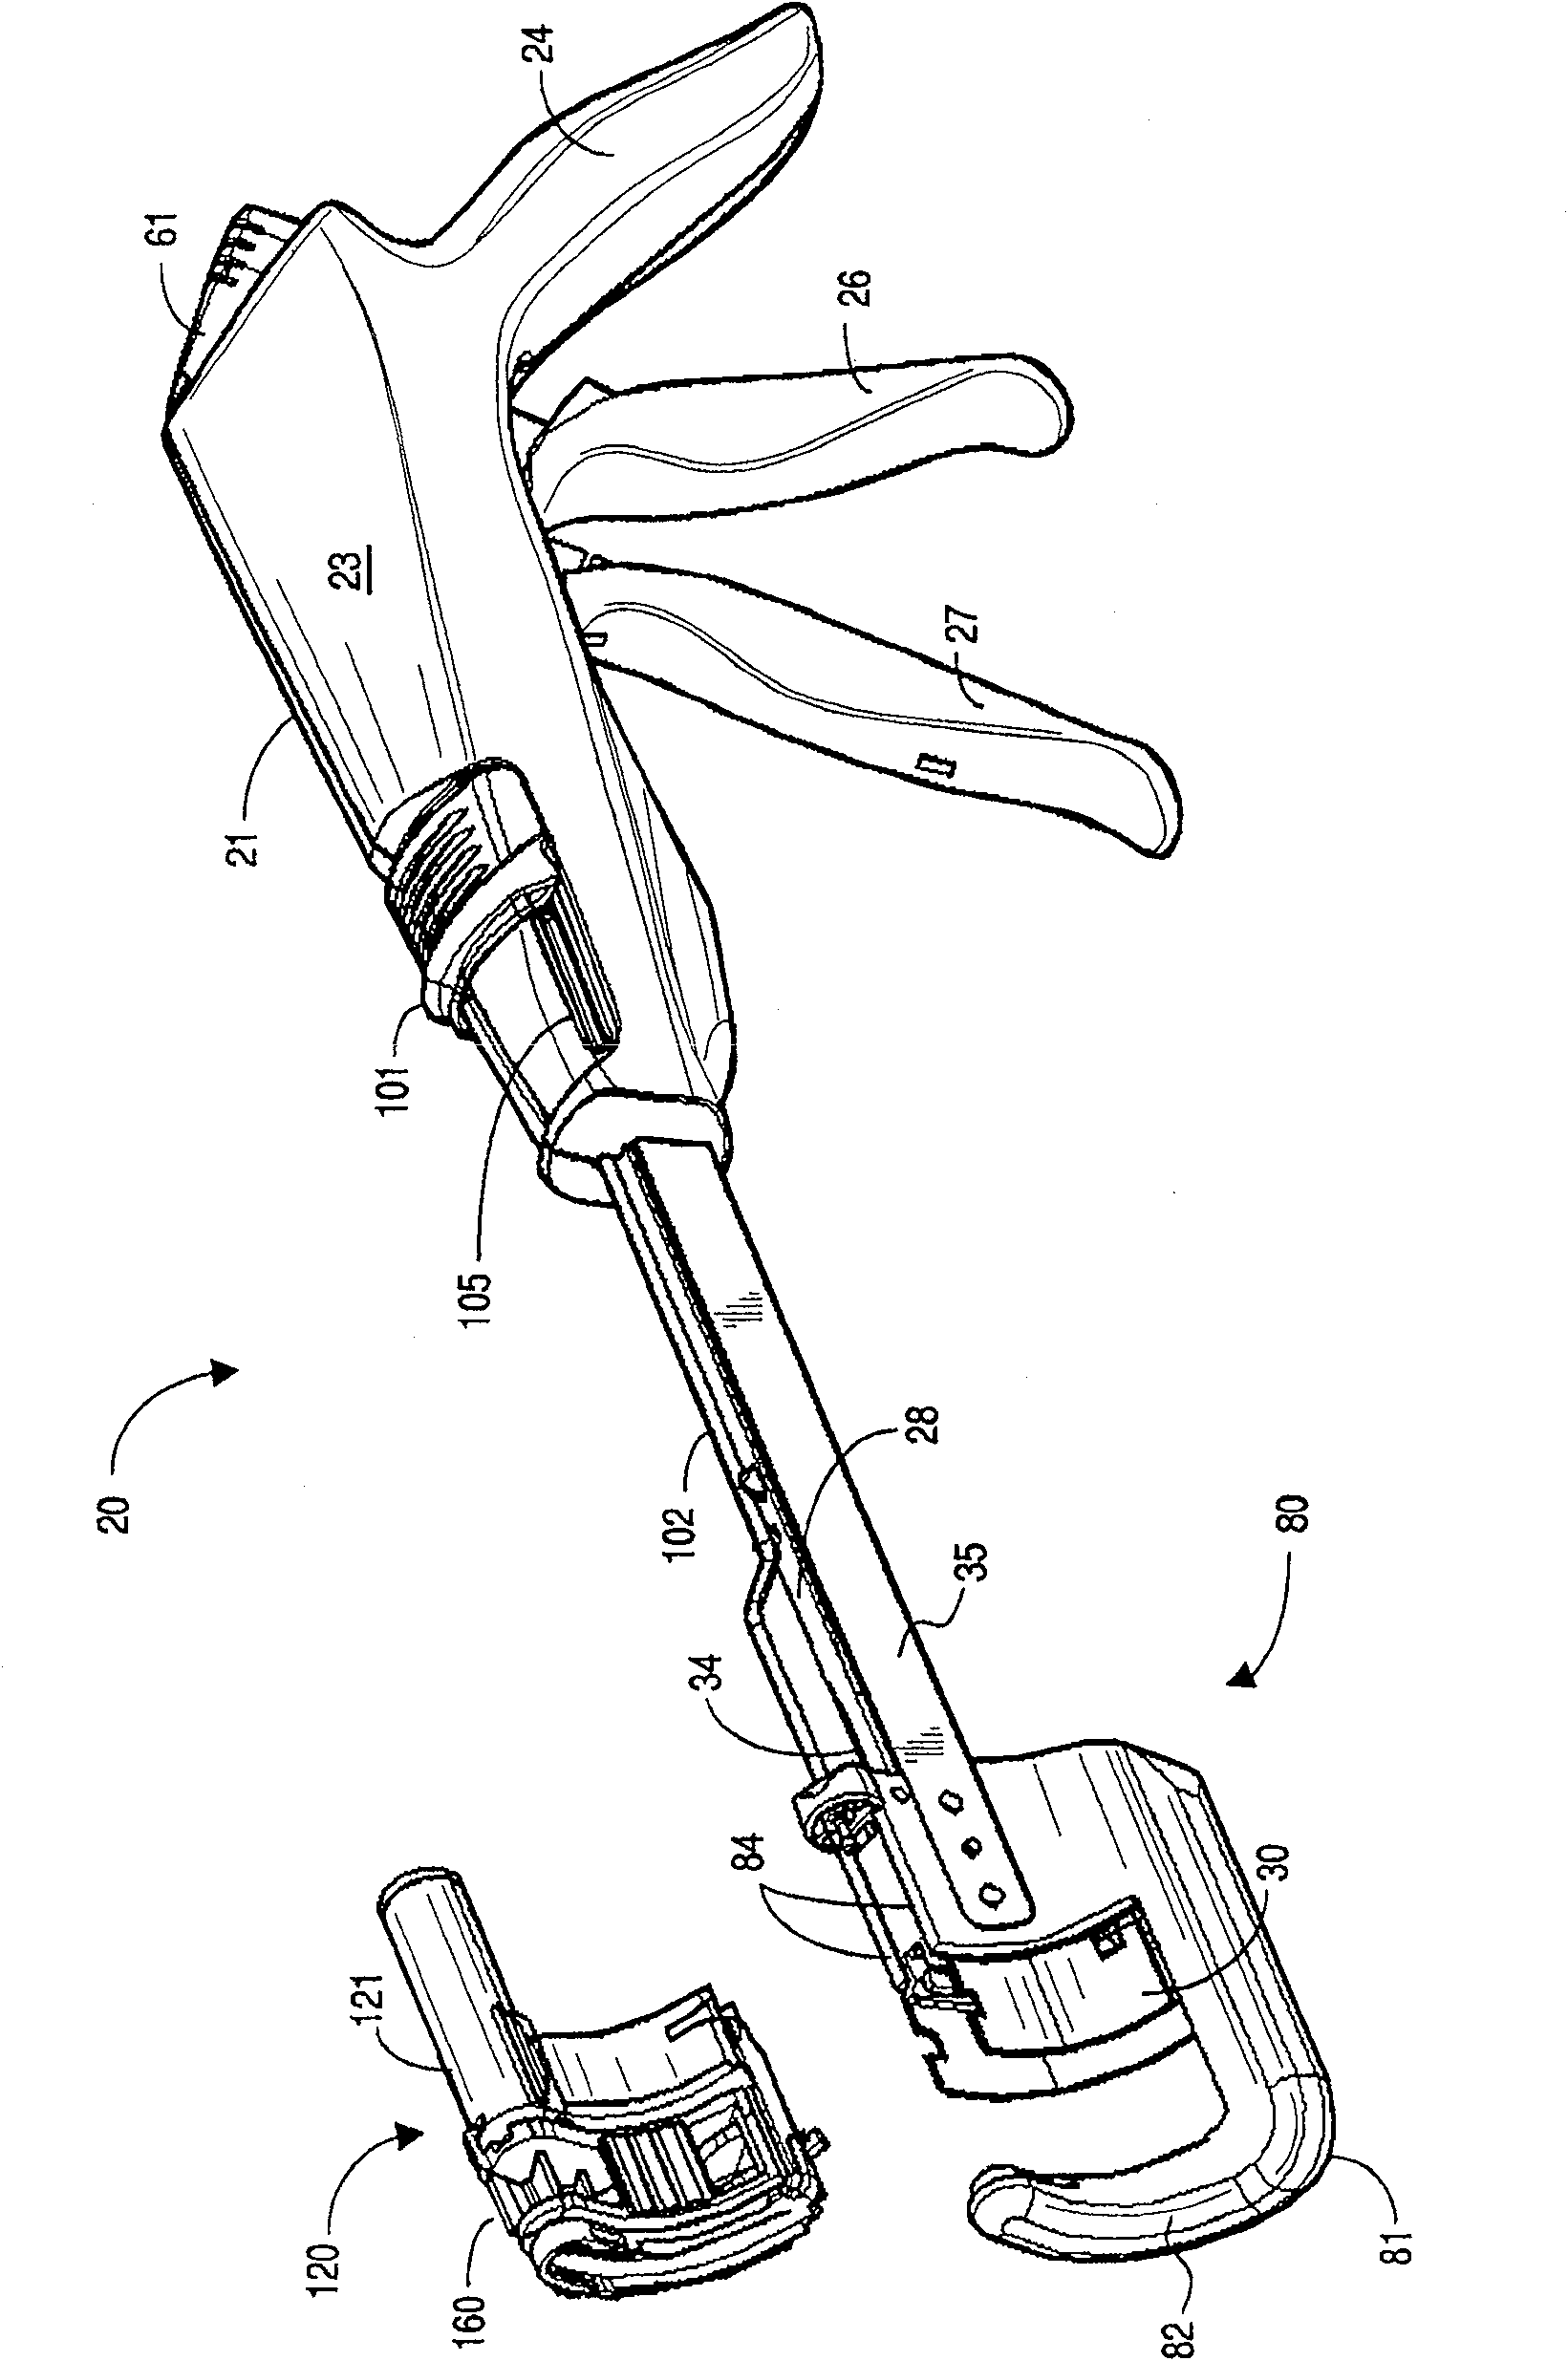 Curved cutter stapler with aligned tissue retention feature